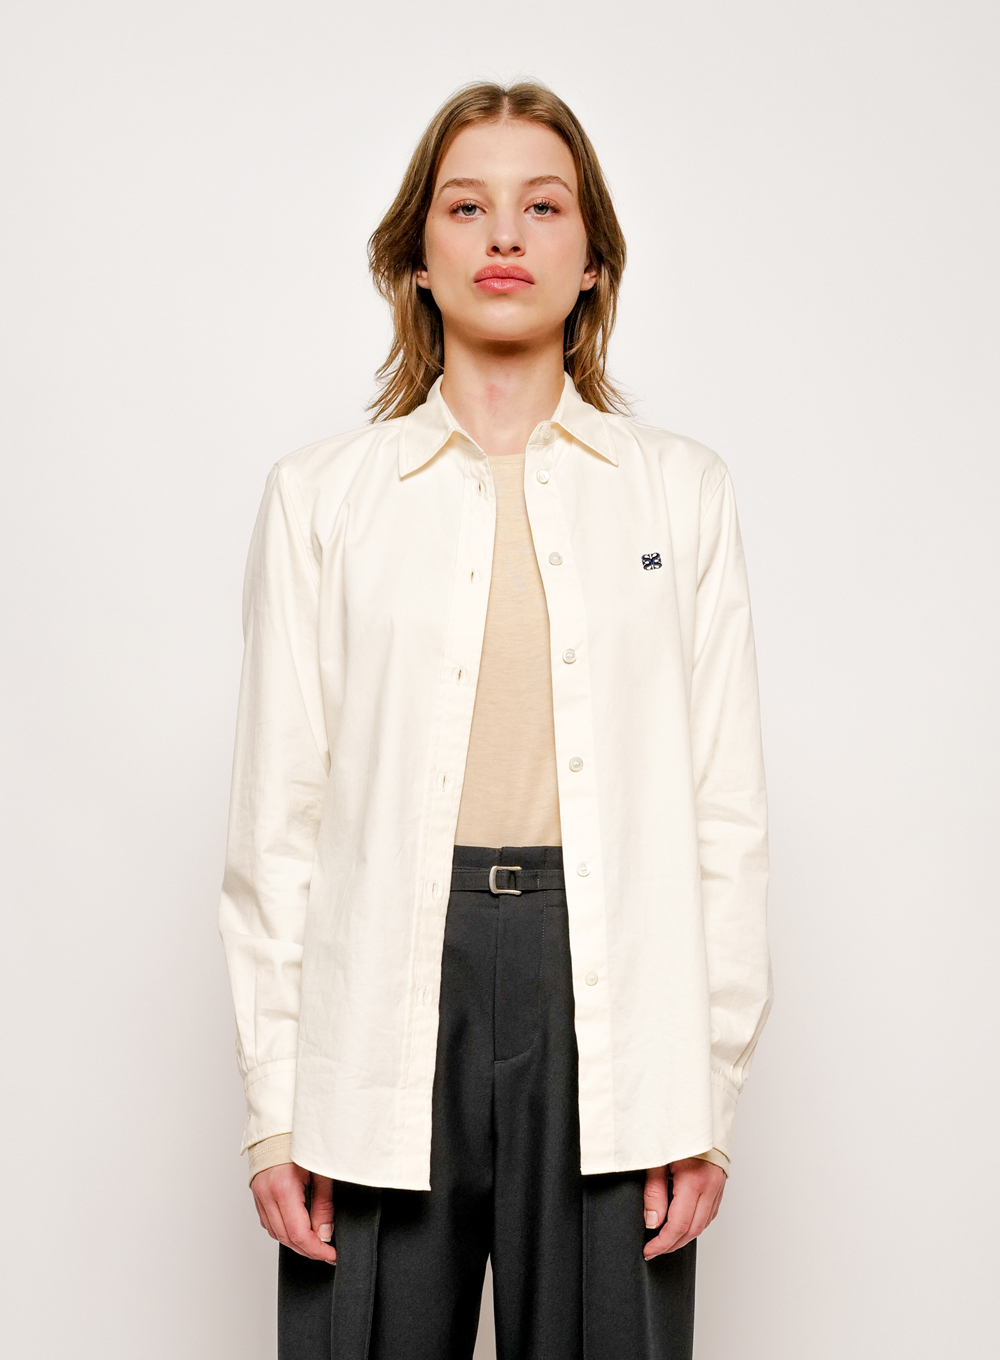 Weekday Classic Fit Cotton Shirts - Cream White